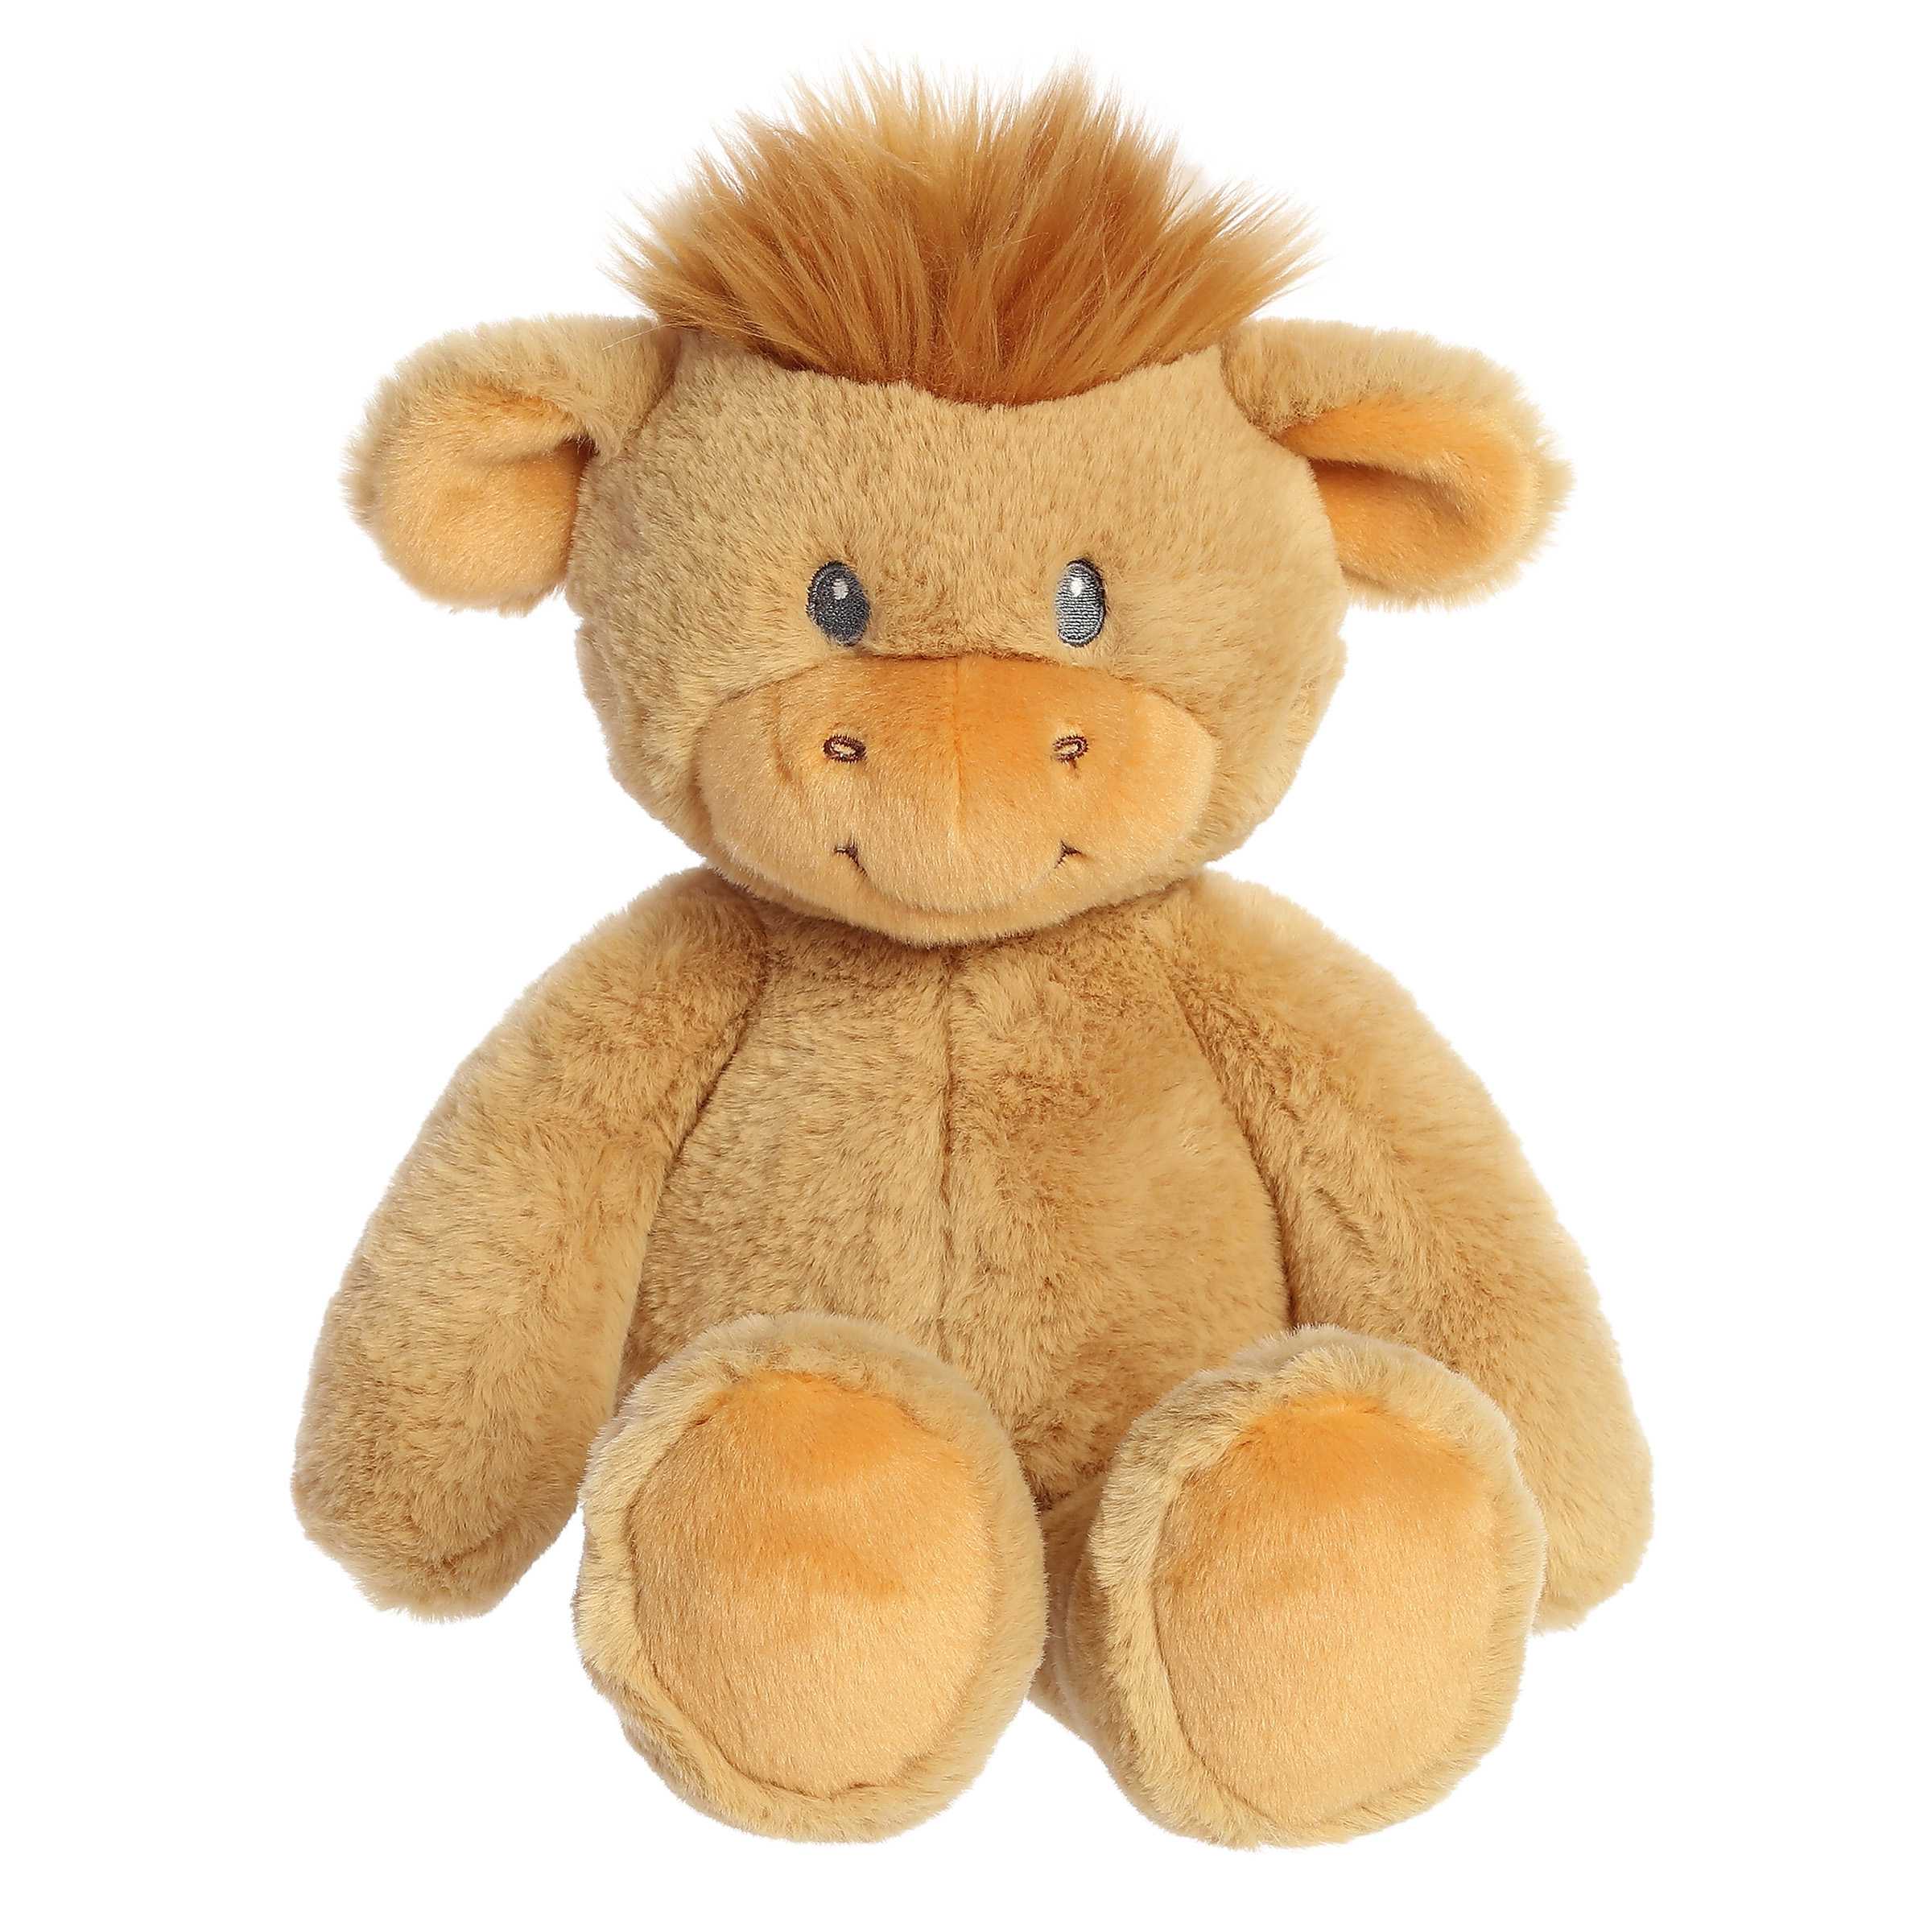 Shaggy fur highland cow plush with a gentle face, crafted with the softest materials for baby toy cuddles, by ebba plush.